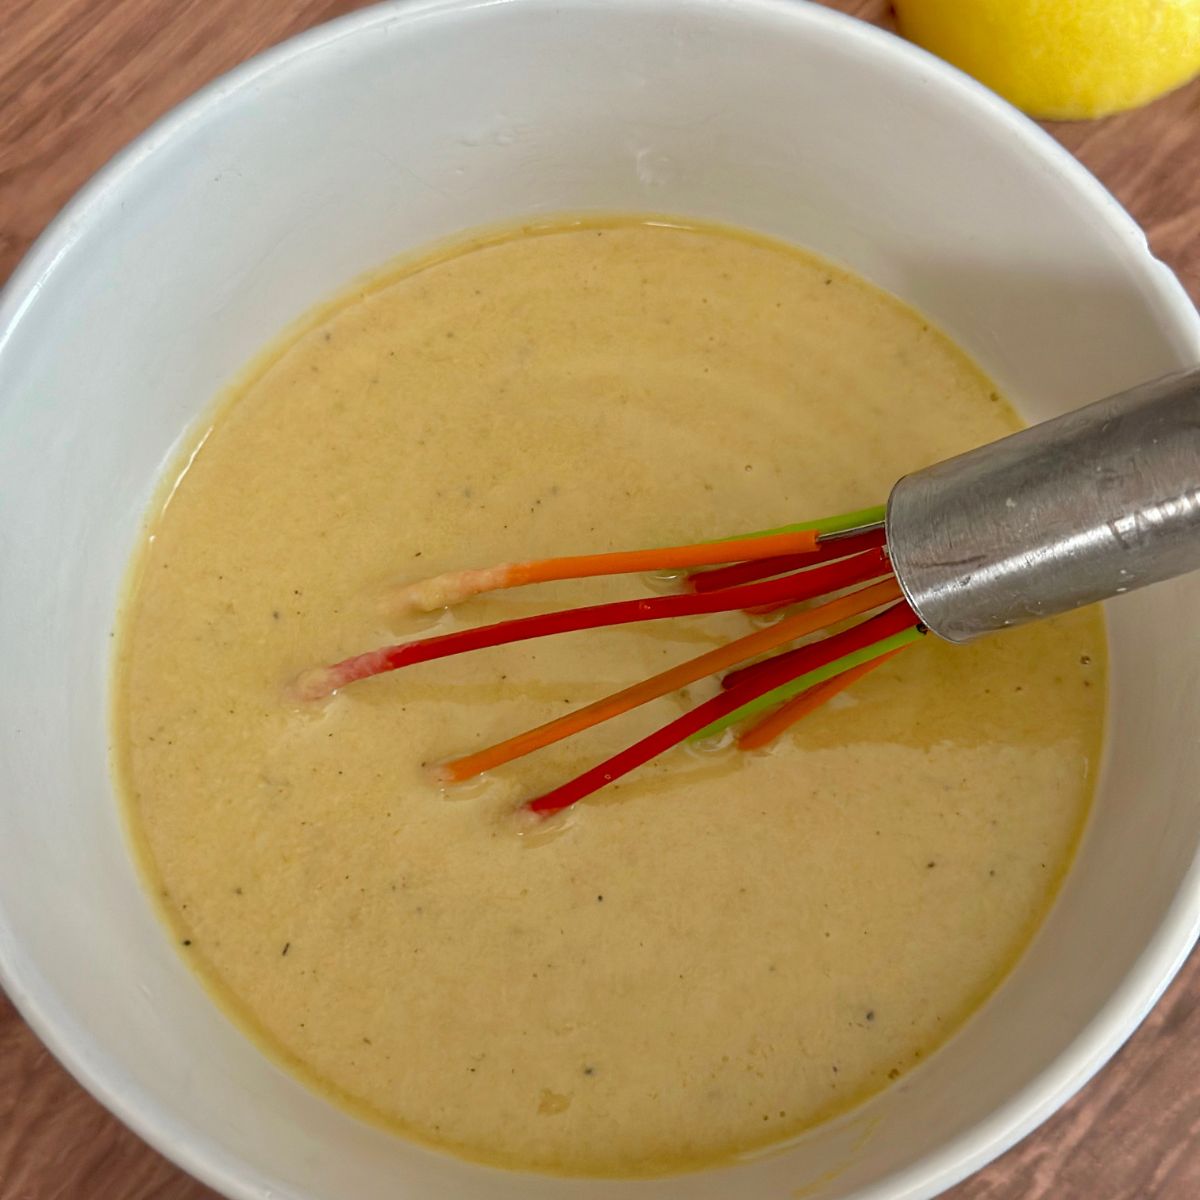 tahini sauce in a small white bowl with red whisk.